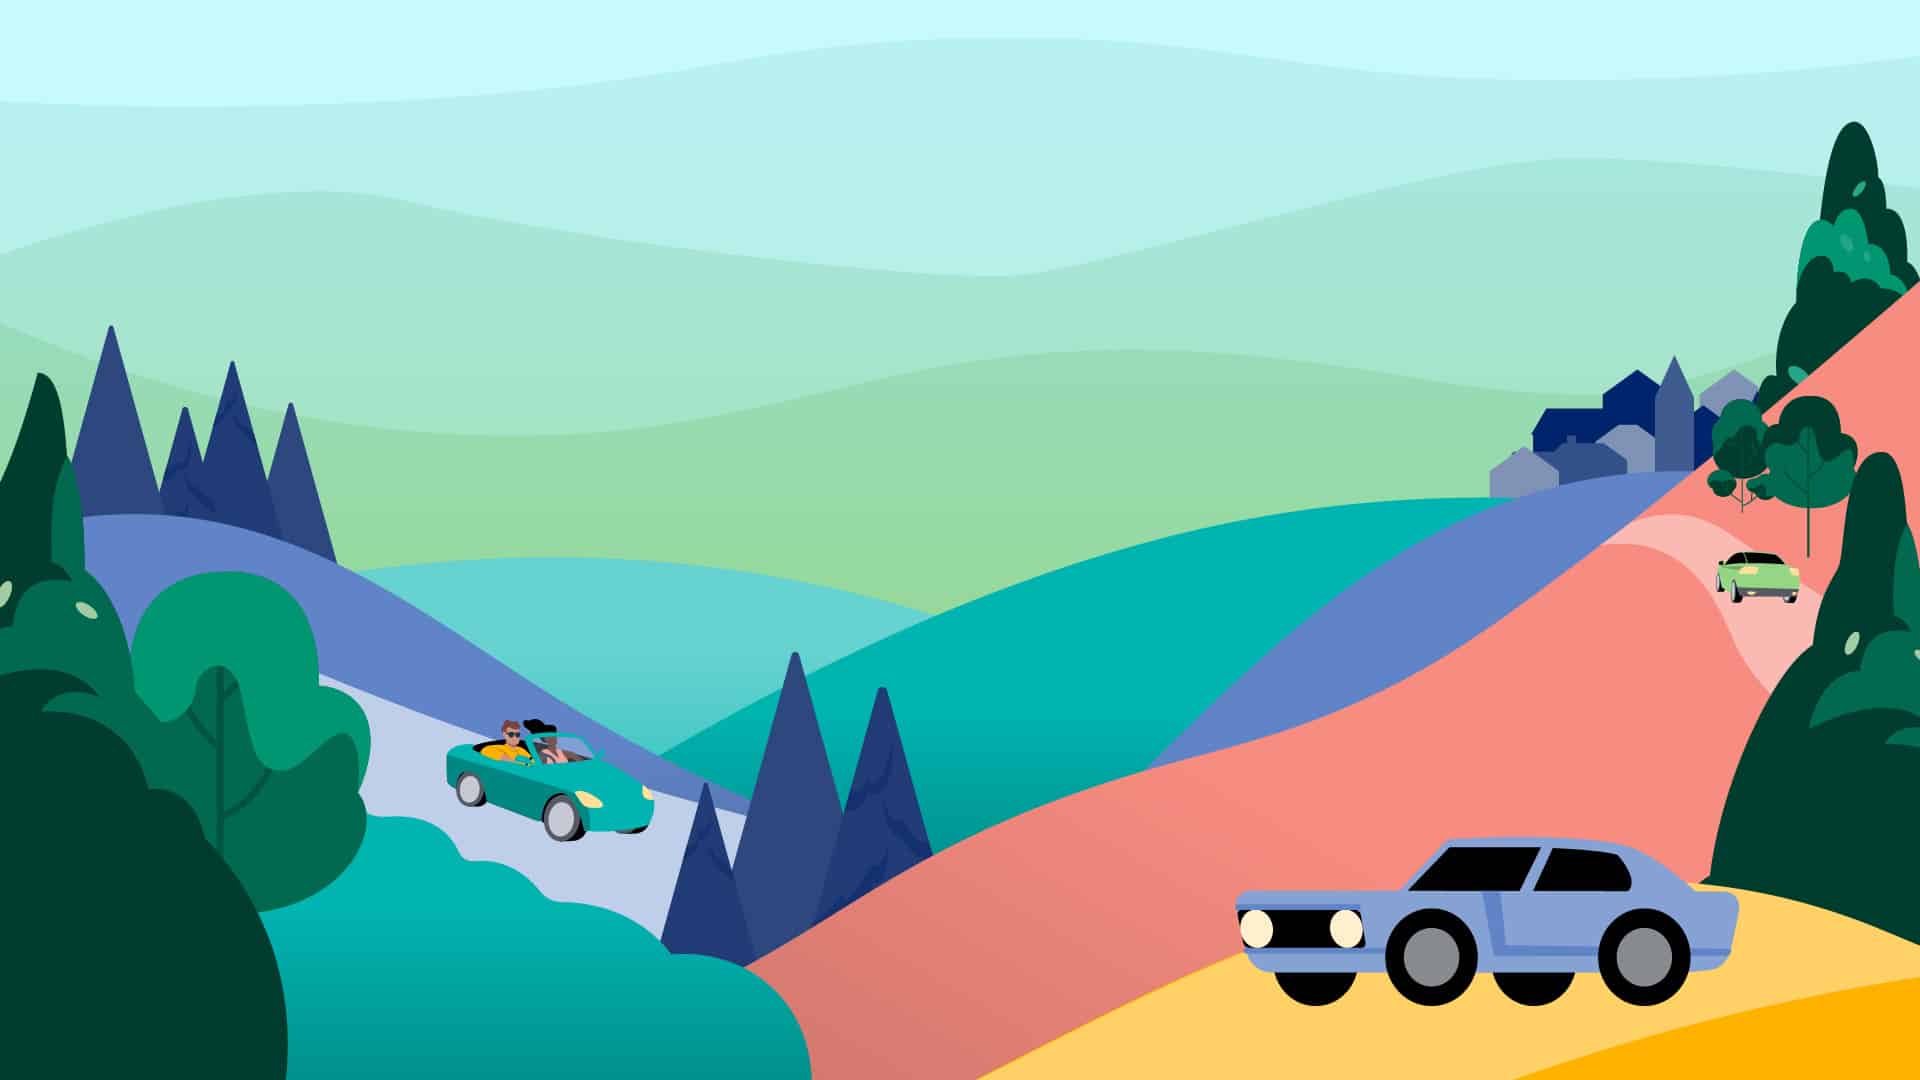 Vehicles driving in a hilly valley